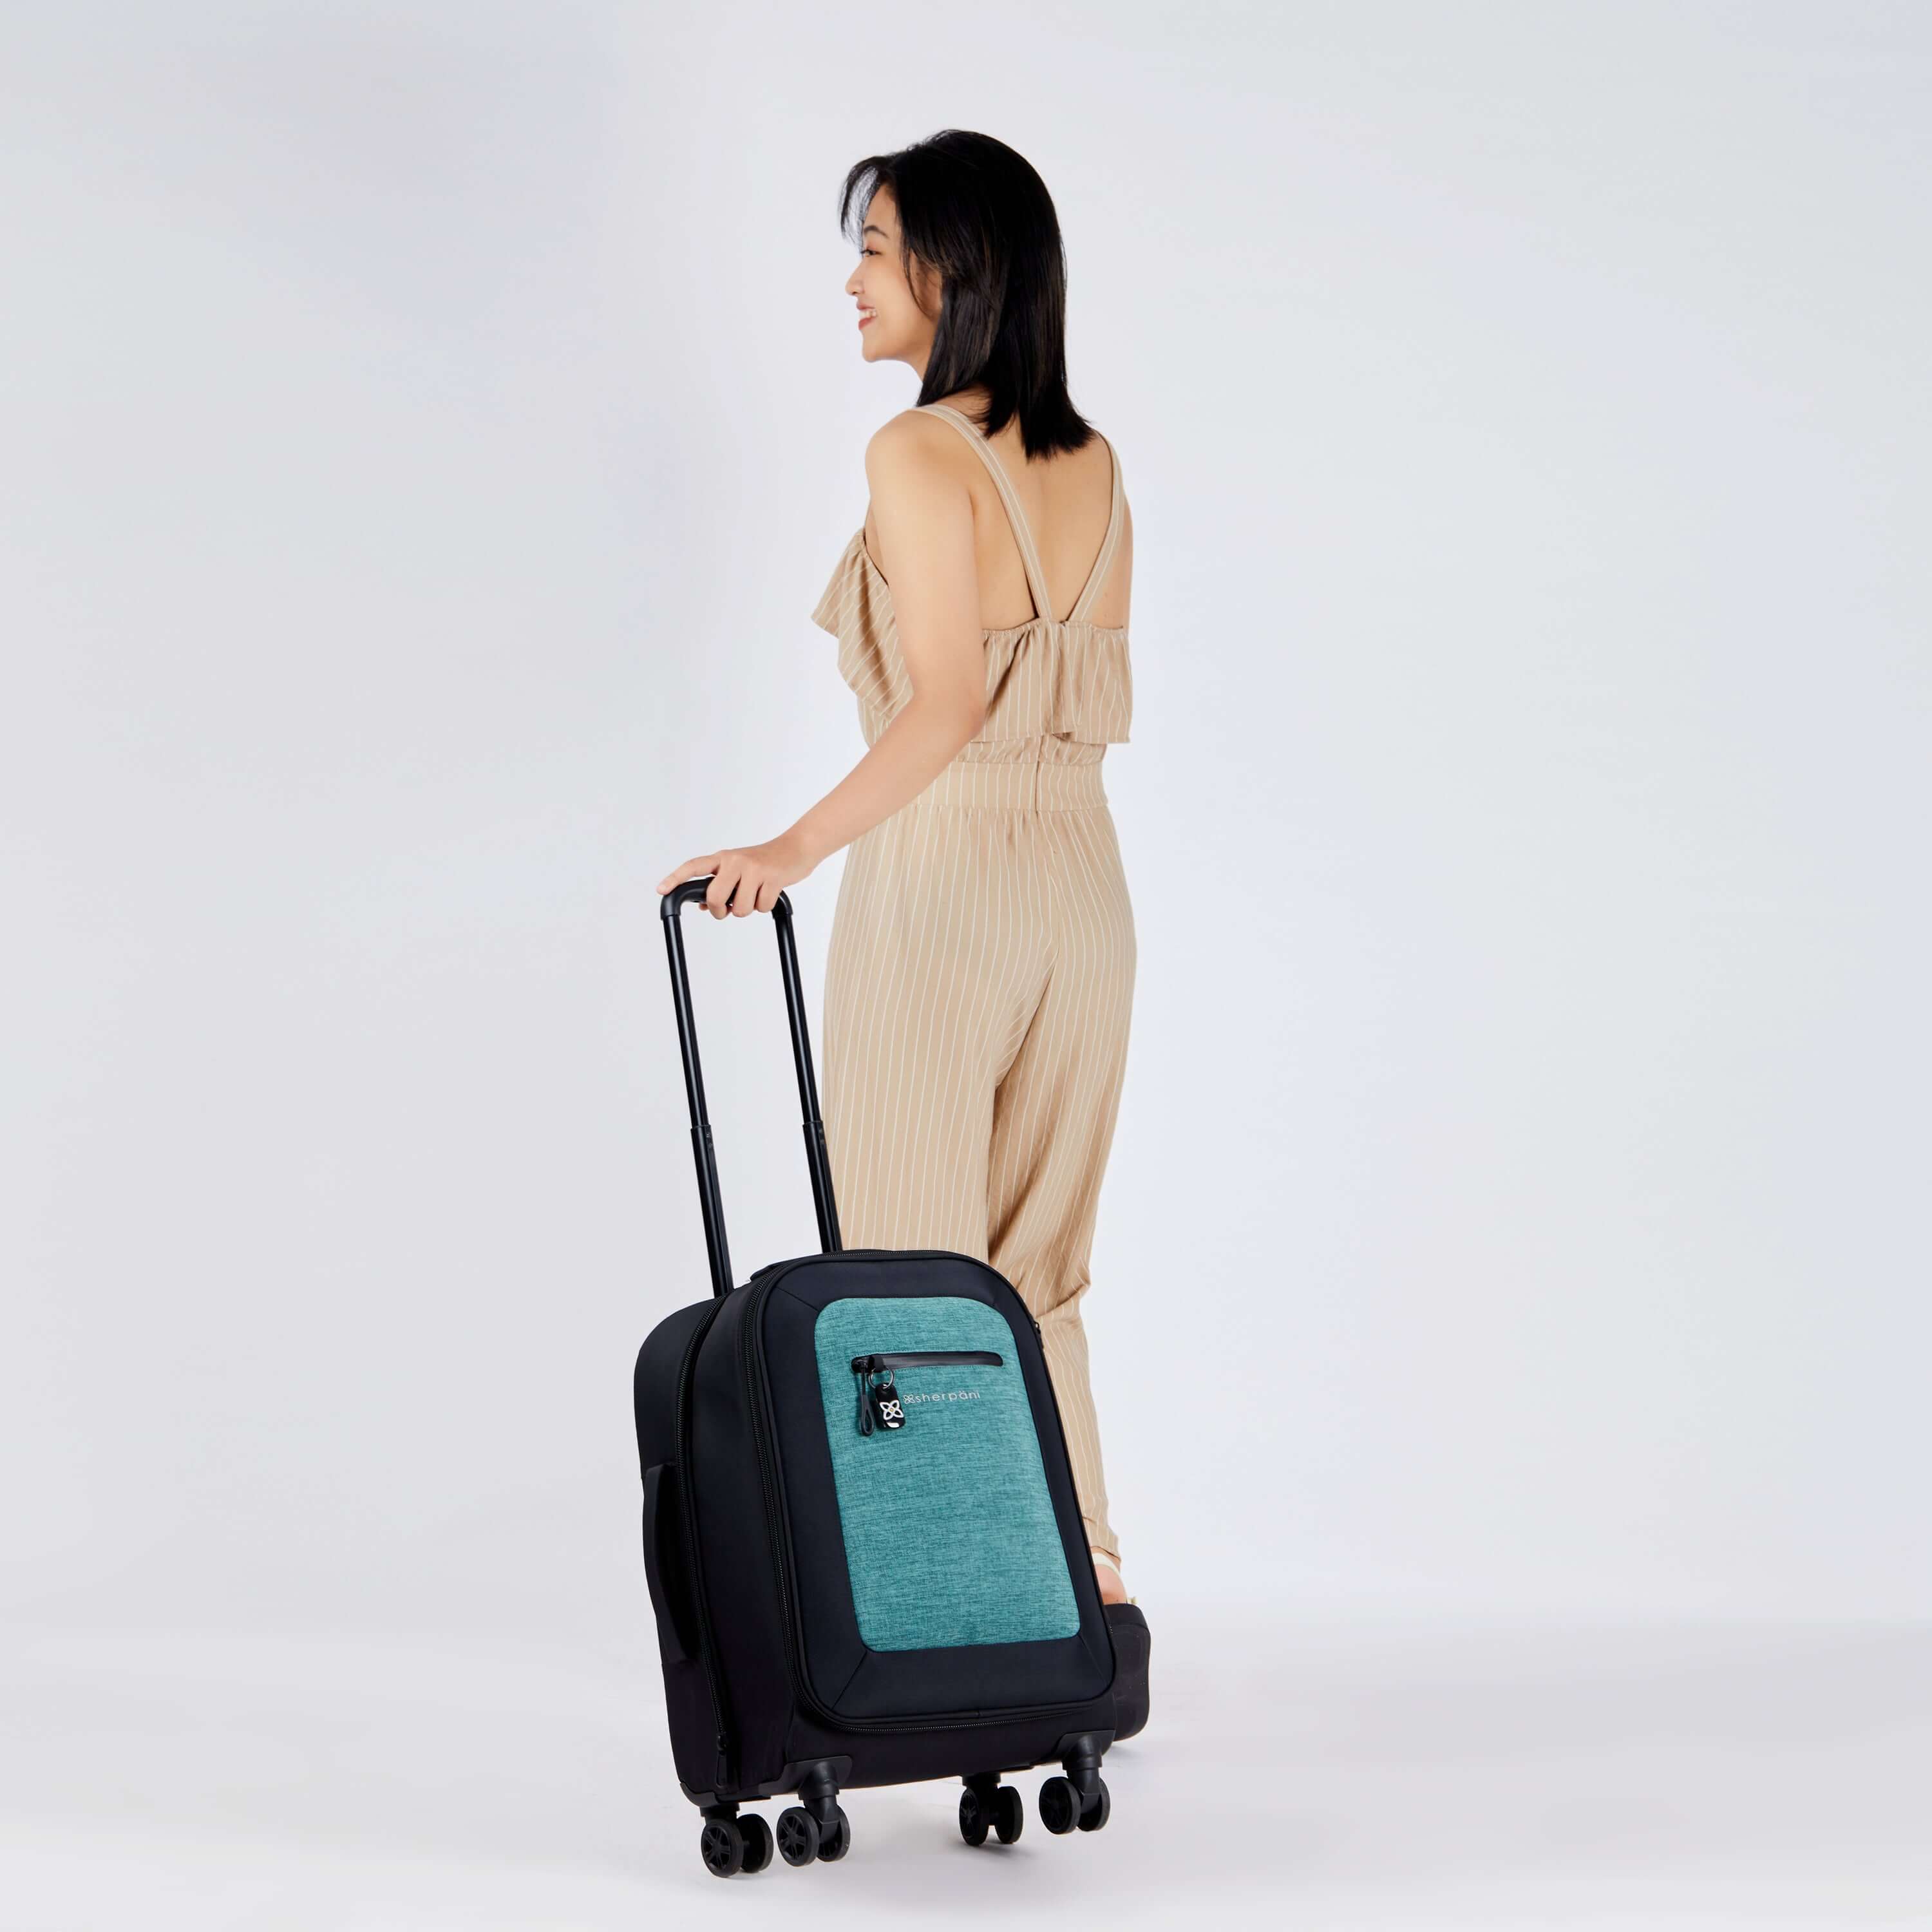 Full bodied view of a dark haired model facing away from the camera. She is wearing a tan jumpsuit. Sherpani's Anti-Theft luggage, the Latitude in Teal, rolls along beside her. 